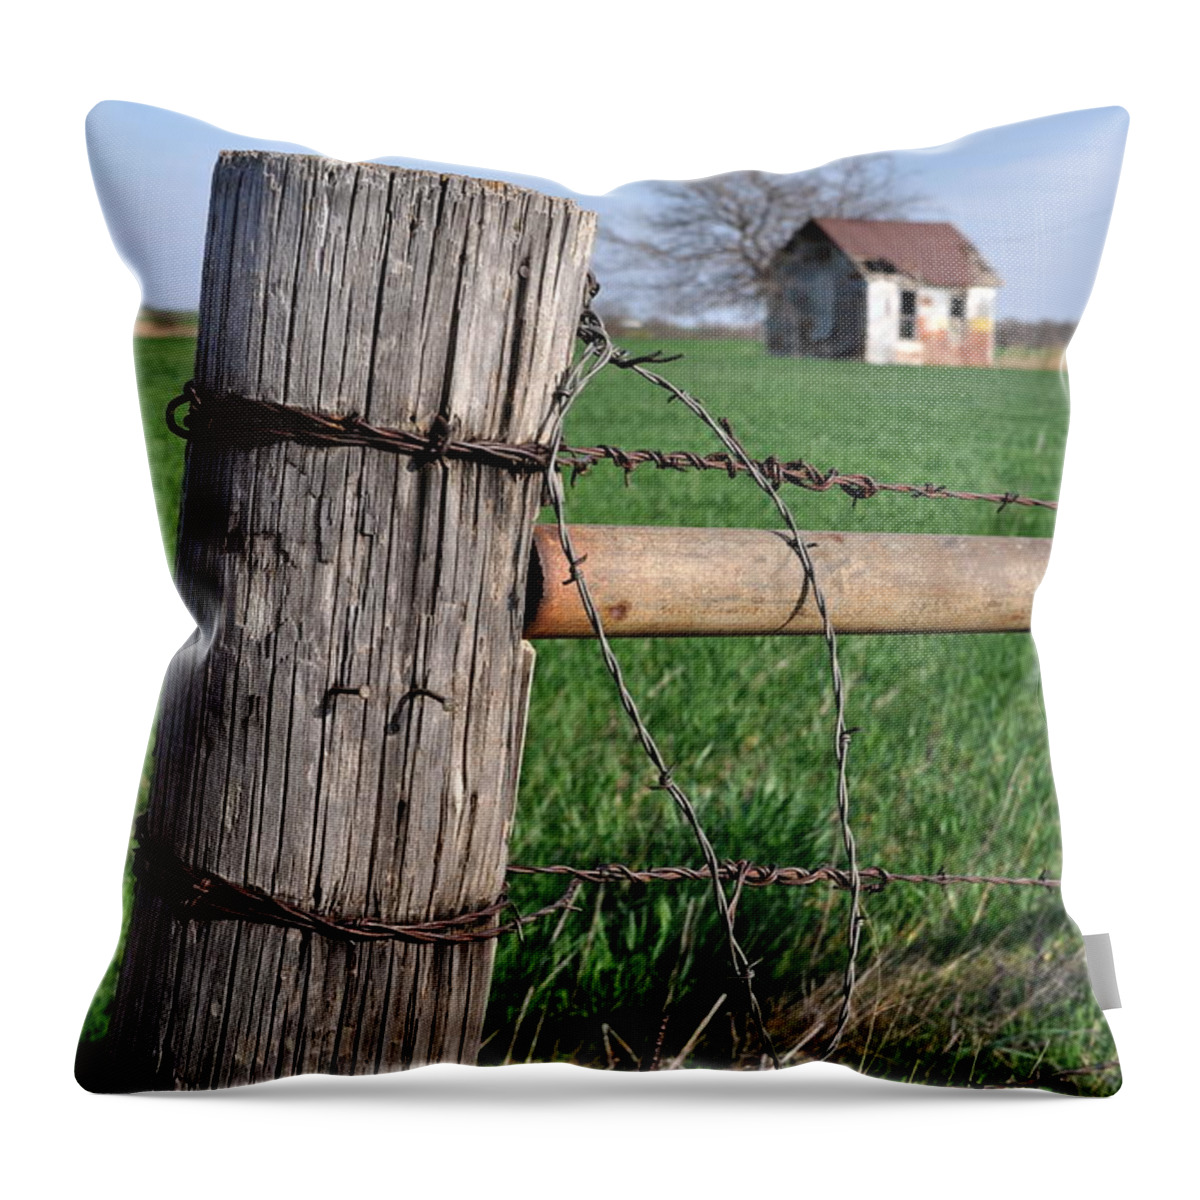 Post Throw Pillow featuring the photograph Shed5 by Anjanette Douglas